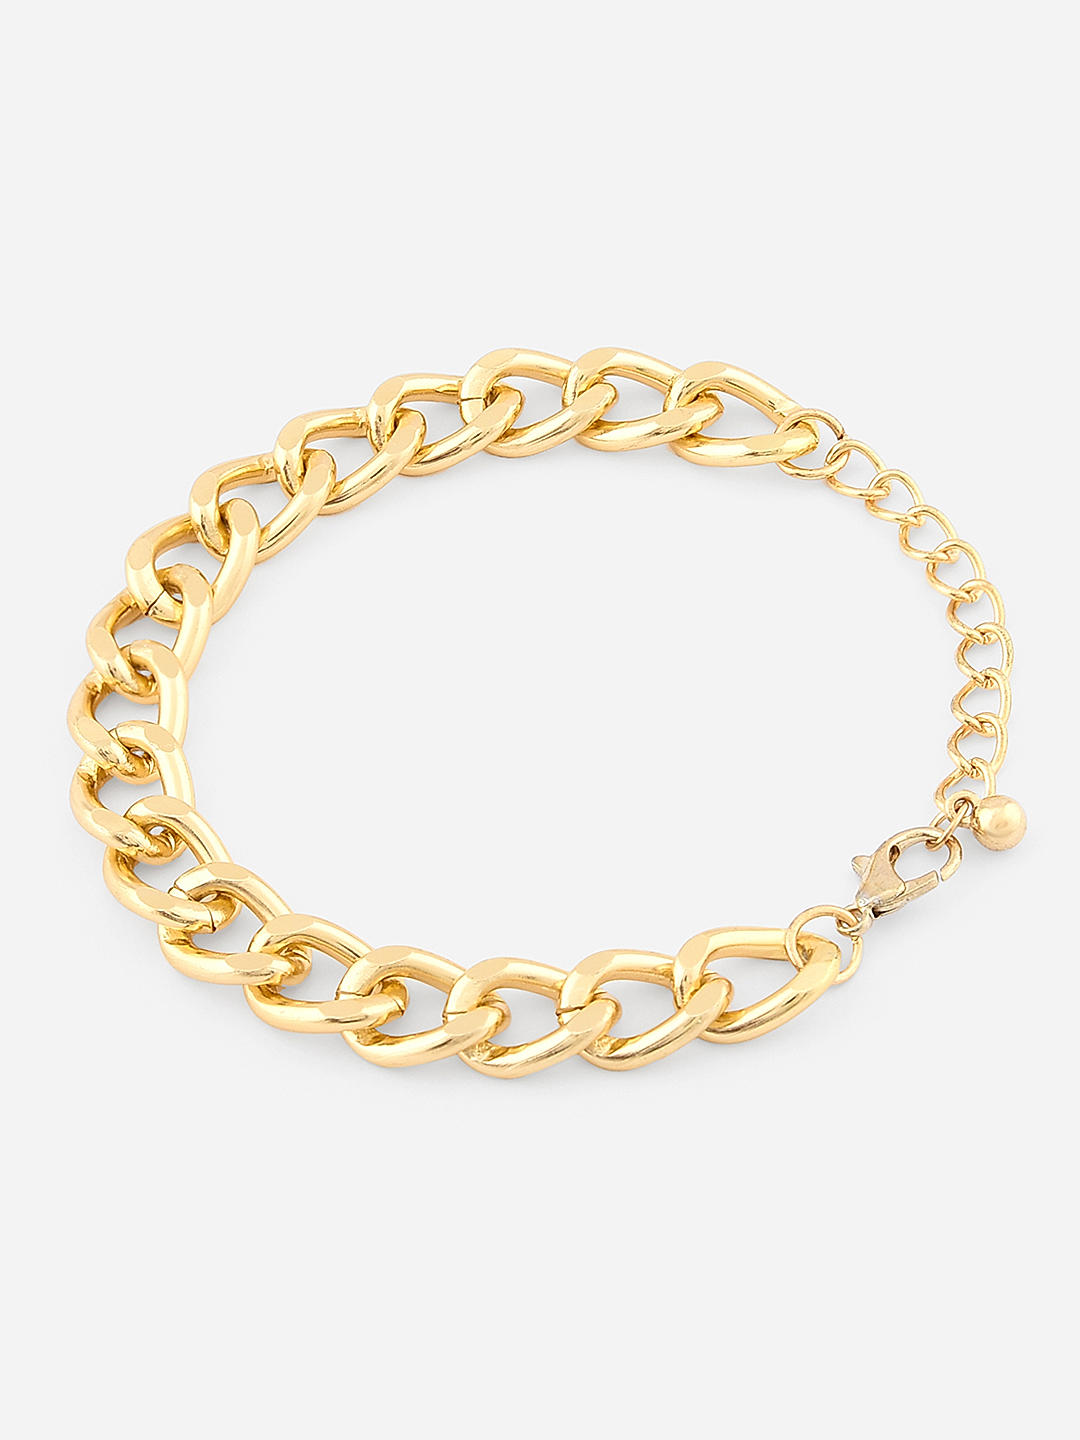 Buy Lilly & Sparkle Women Set of 3 Gold-Plated Acetate Link Chain Bracelet  online